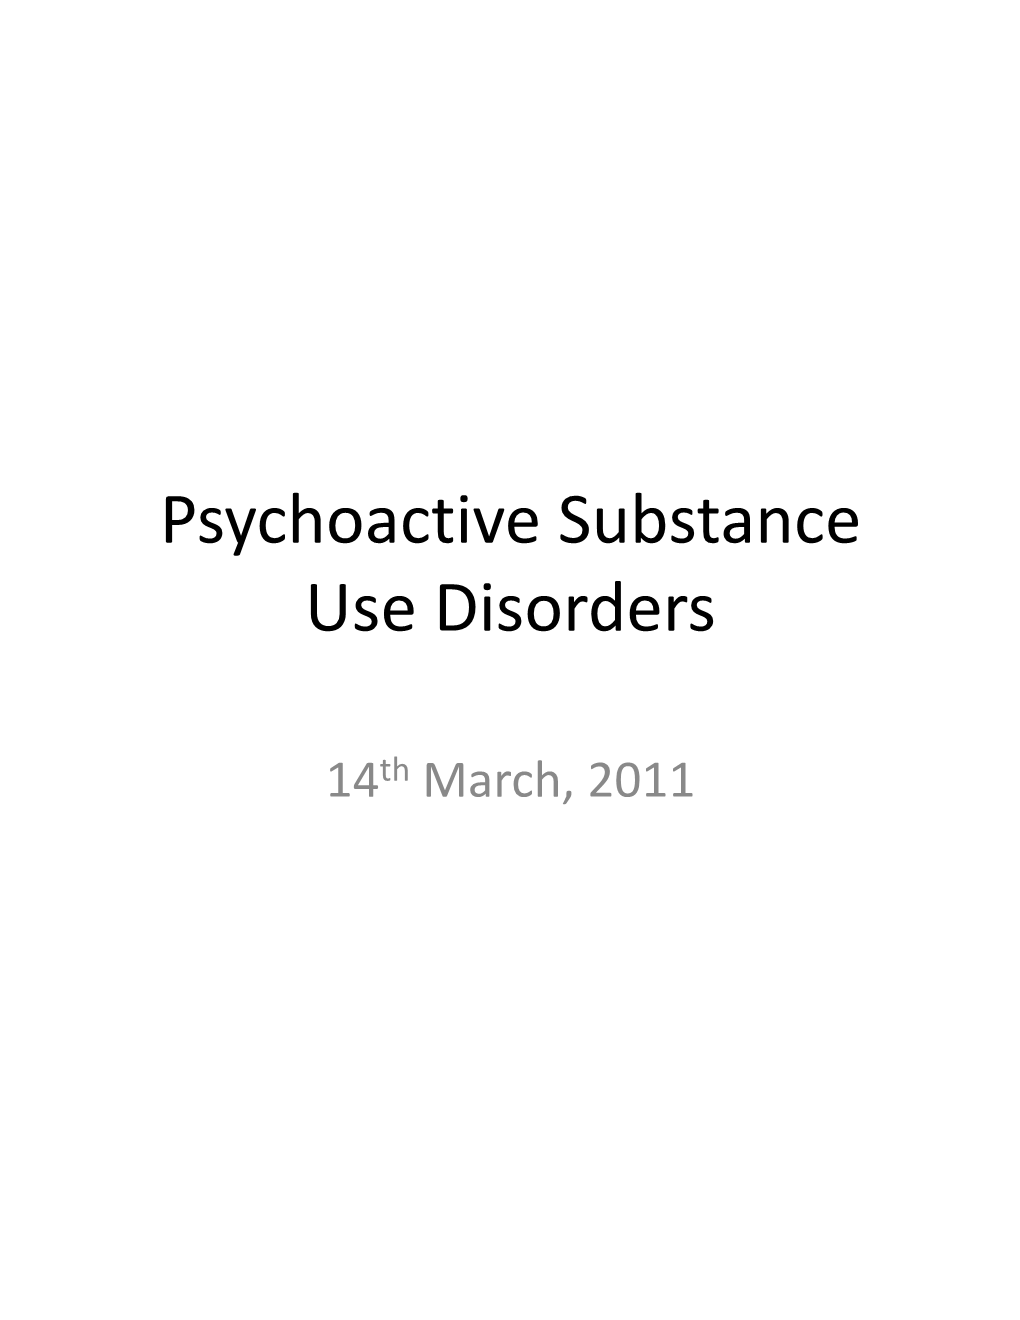 Psychoactive Substance Use Disorders